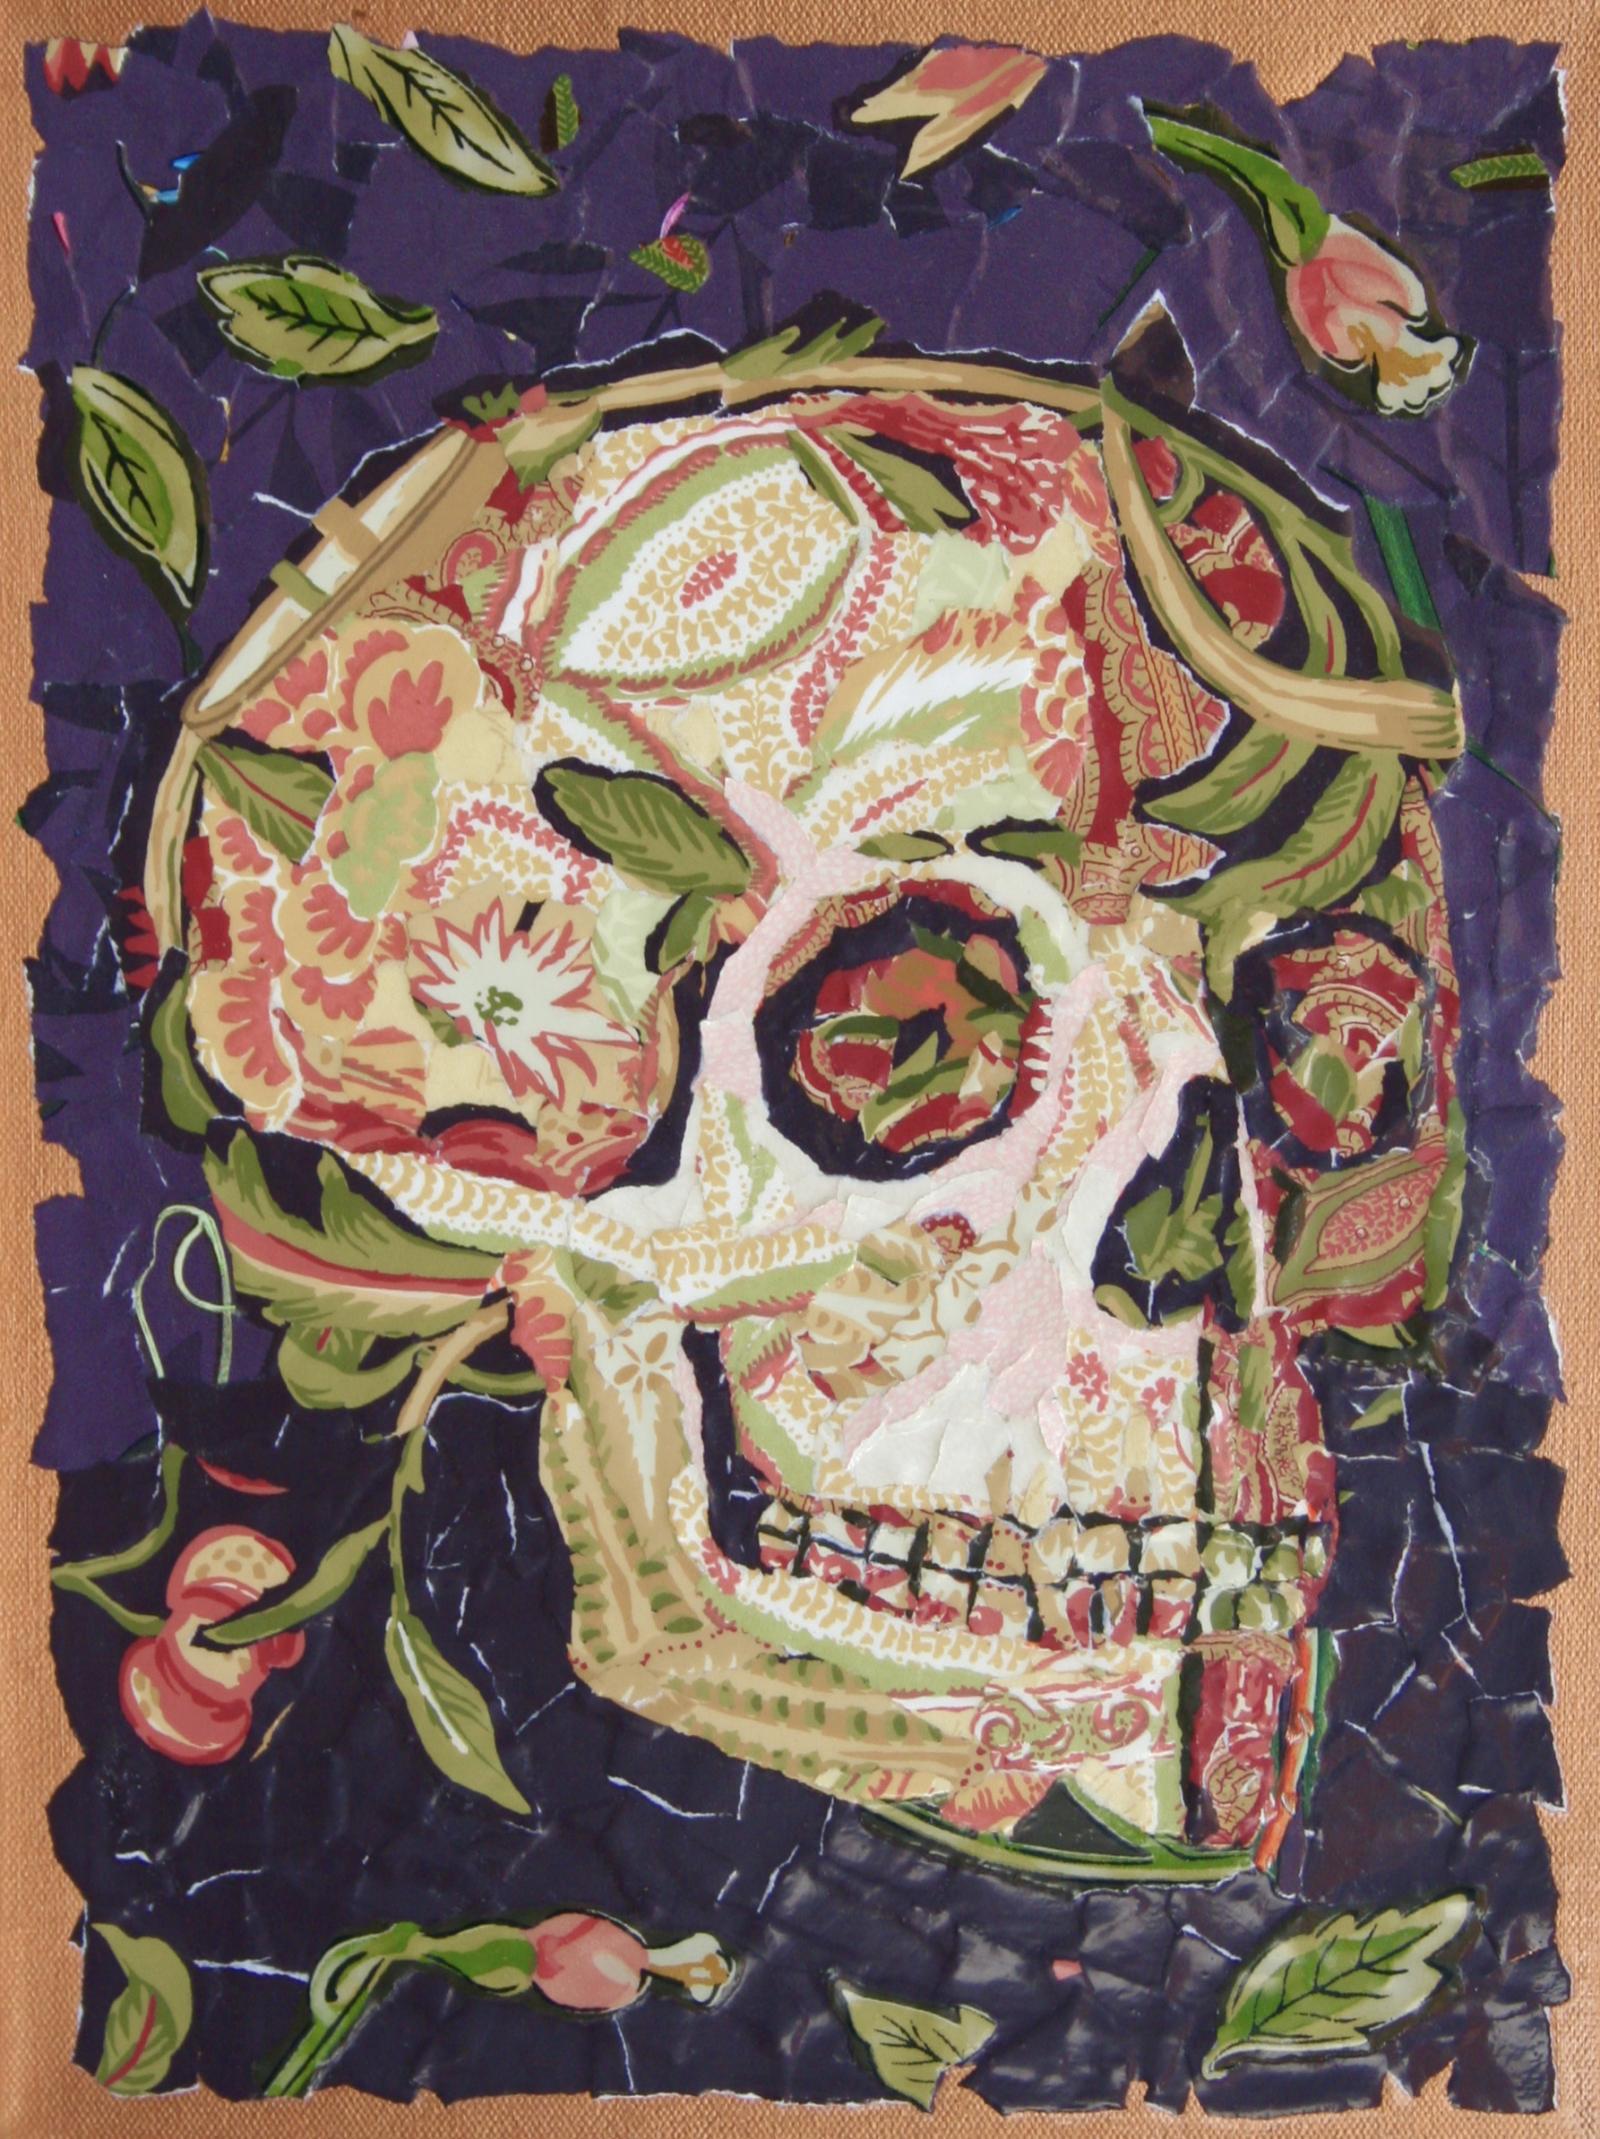 "Grave Digger" is  a wallpaper collage depicting a three quarter view of a human skull. The collage is made from vintage wallpaper with small images of flora and fauna and symbolizes life.